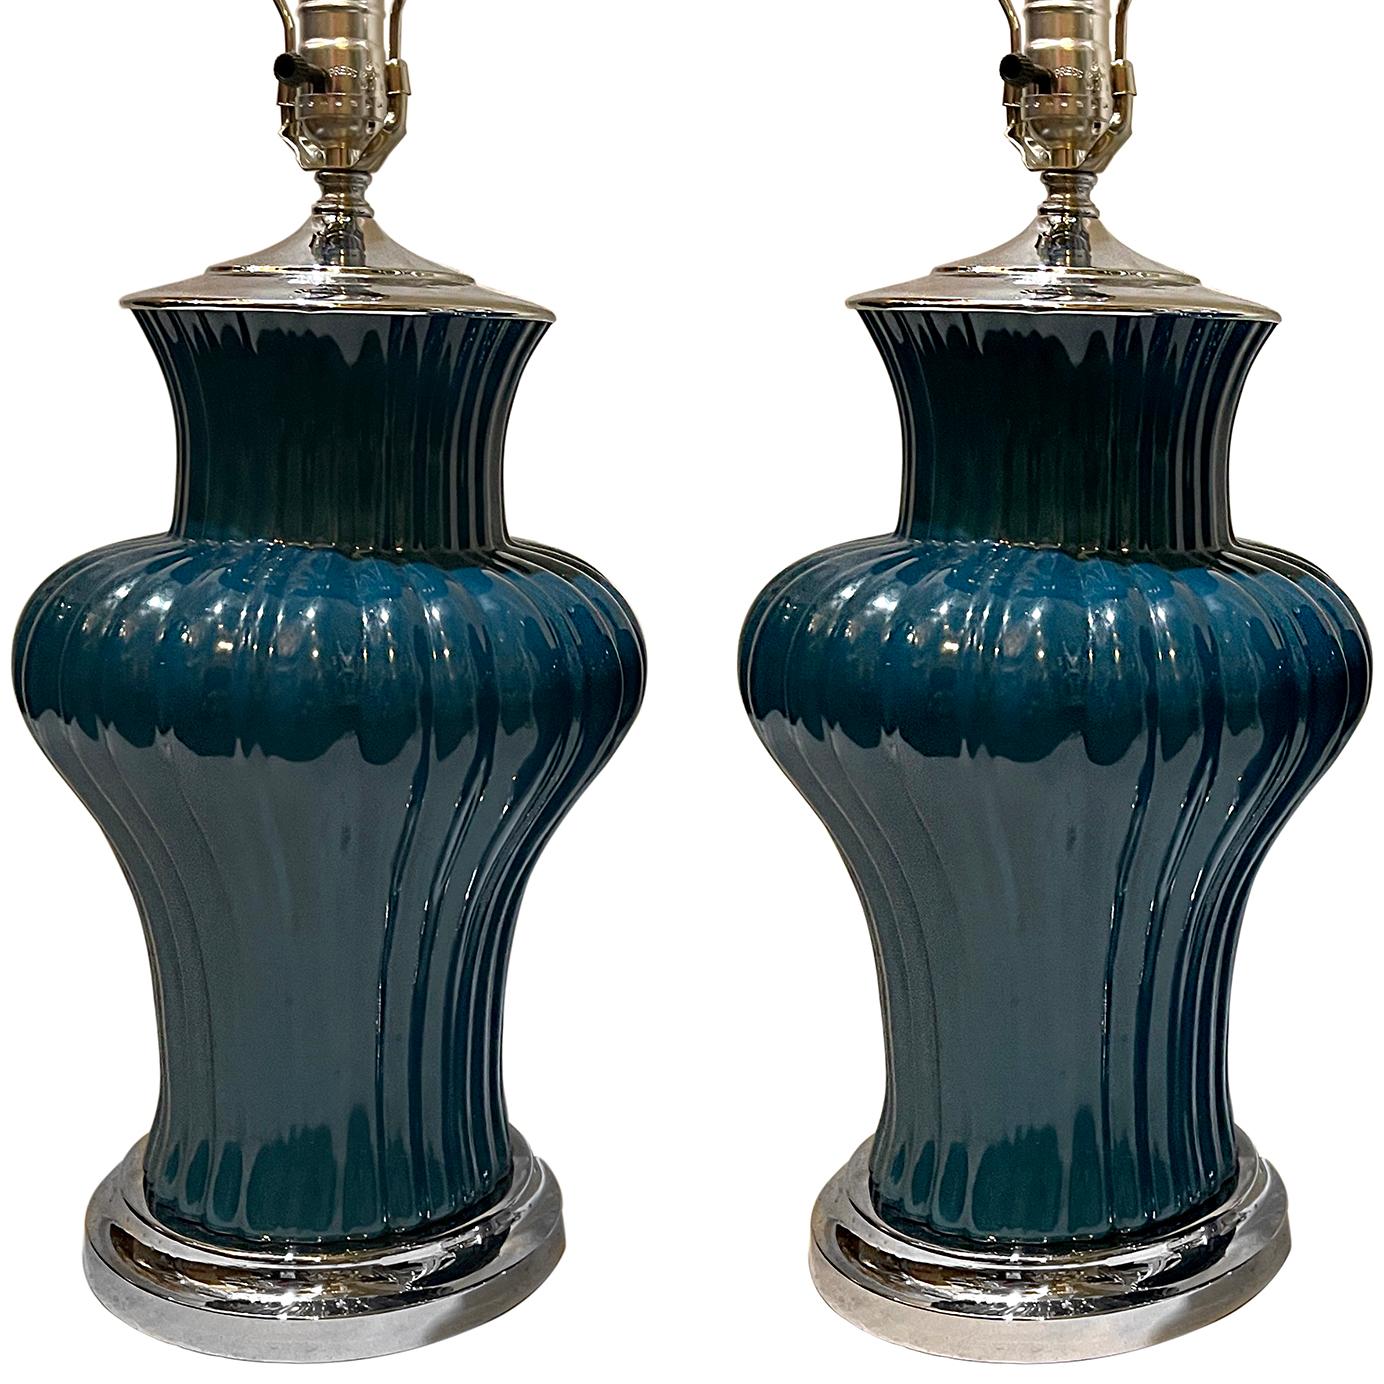 Italian Pair of Midcentury Porcelain Lamps For Sale